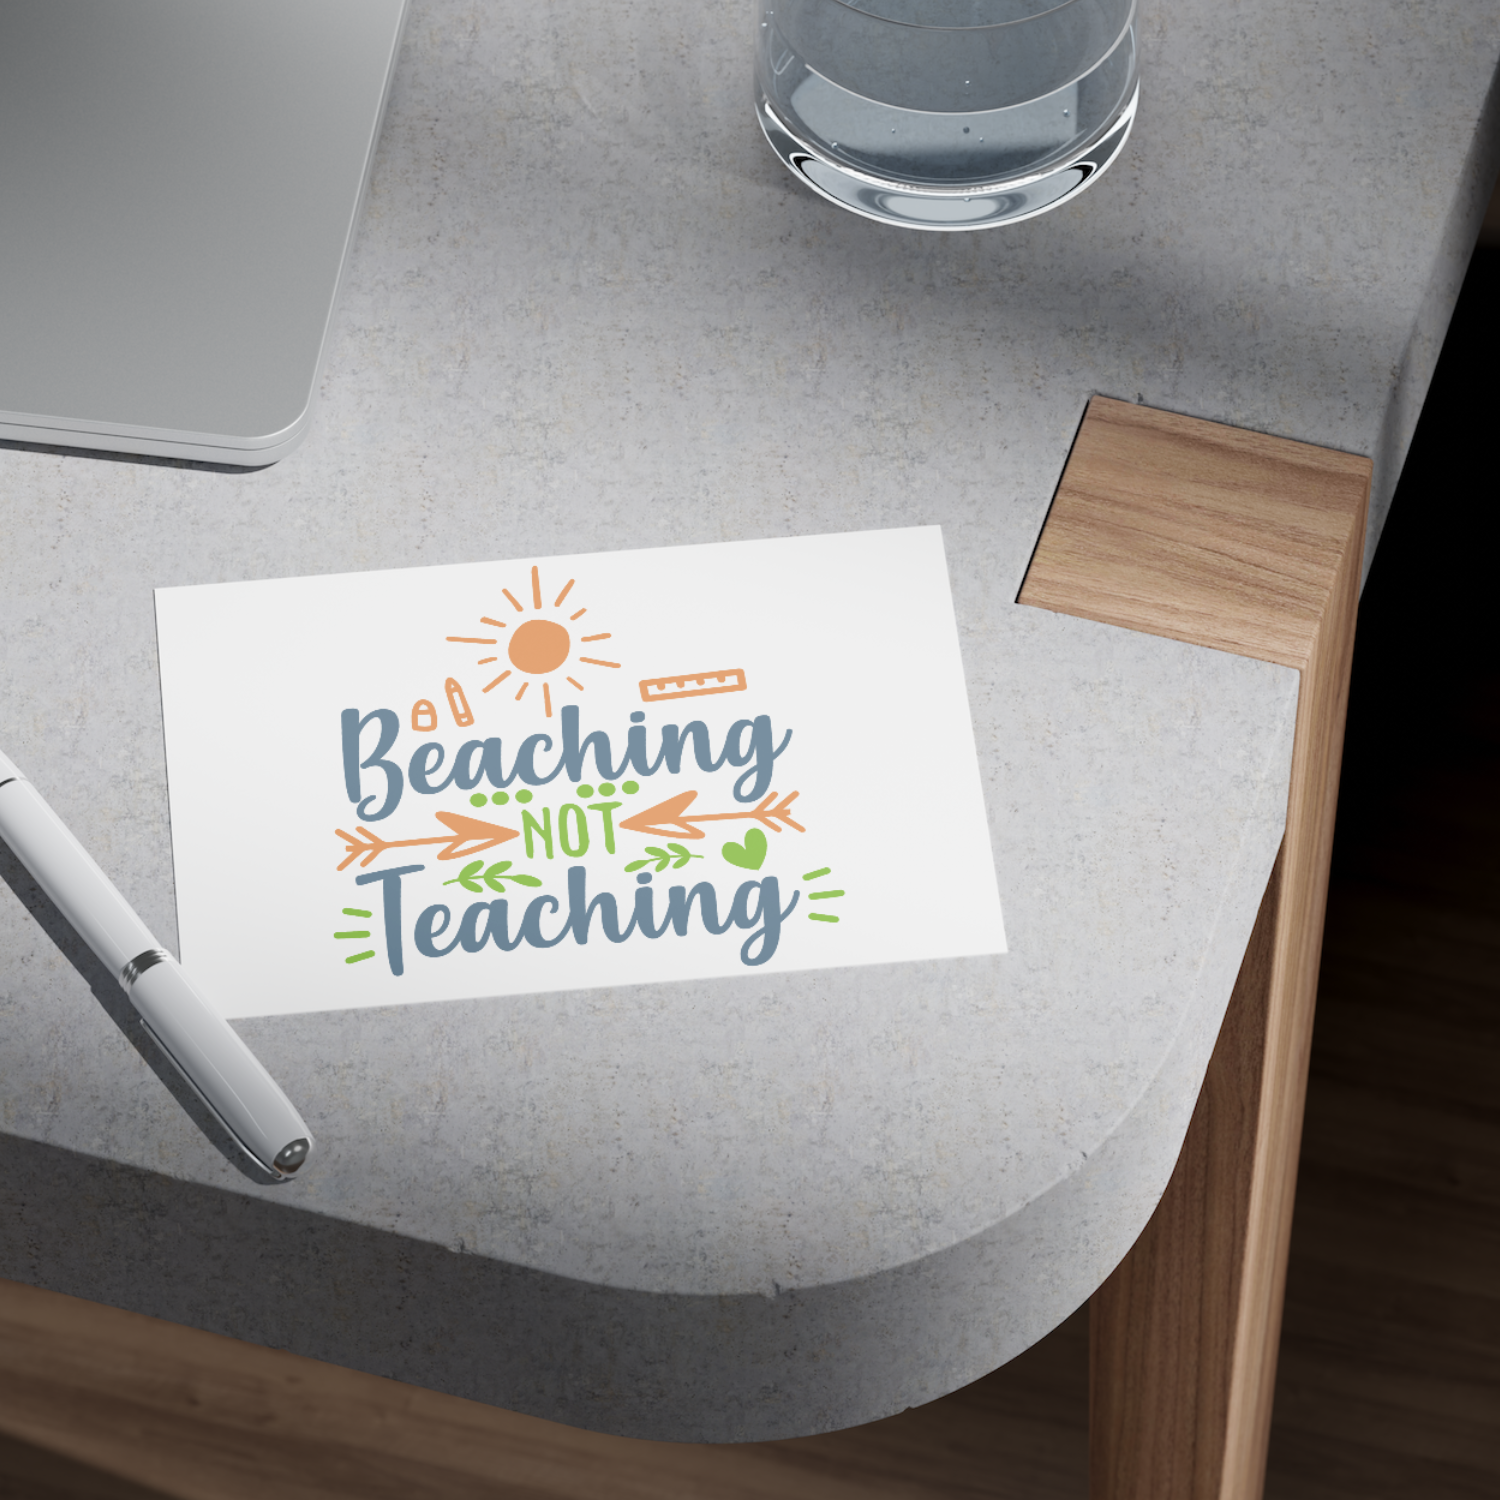 Beaching not teaching SVG | Digital Download | Cut File | SVG - Only The Sweet Stuff